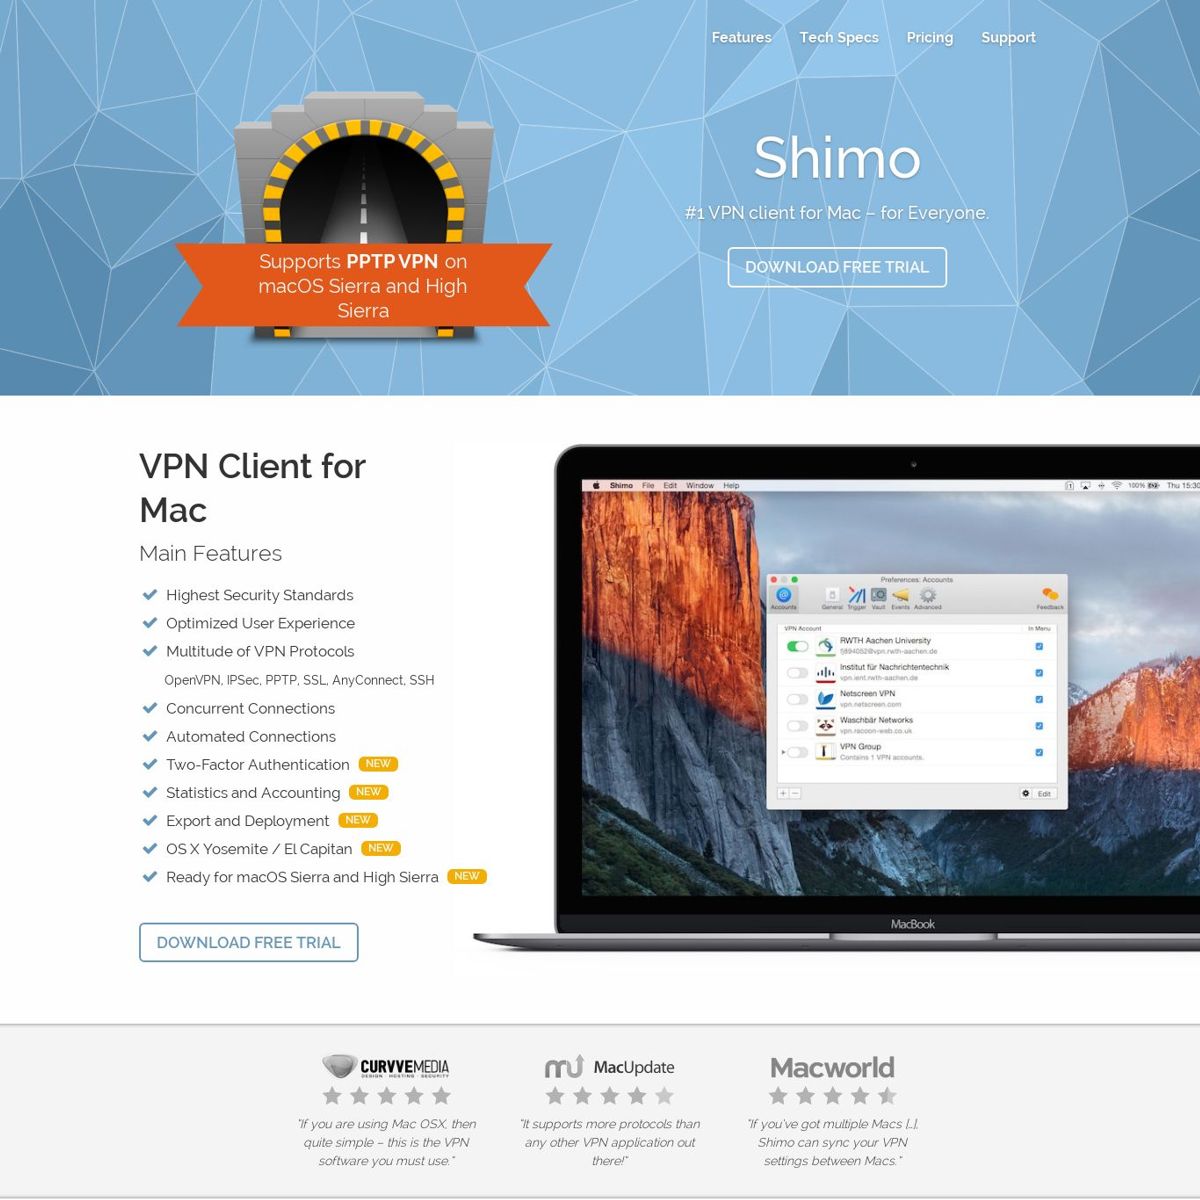 shimo vpn client for mac review